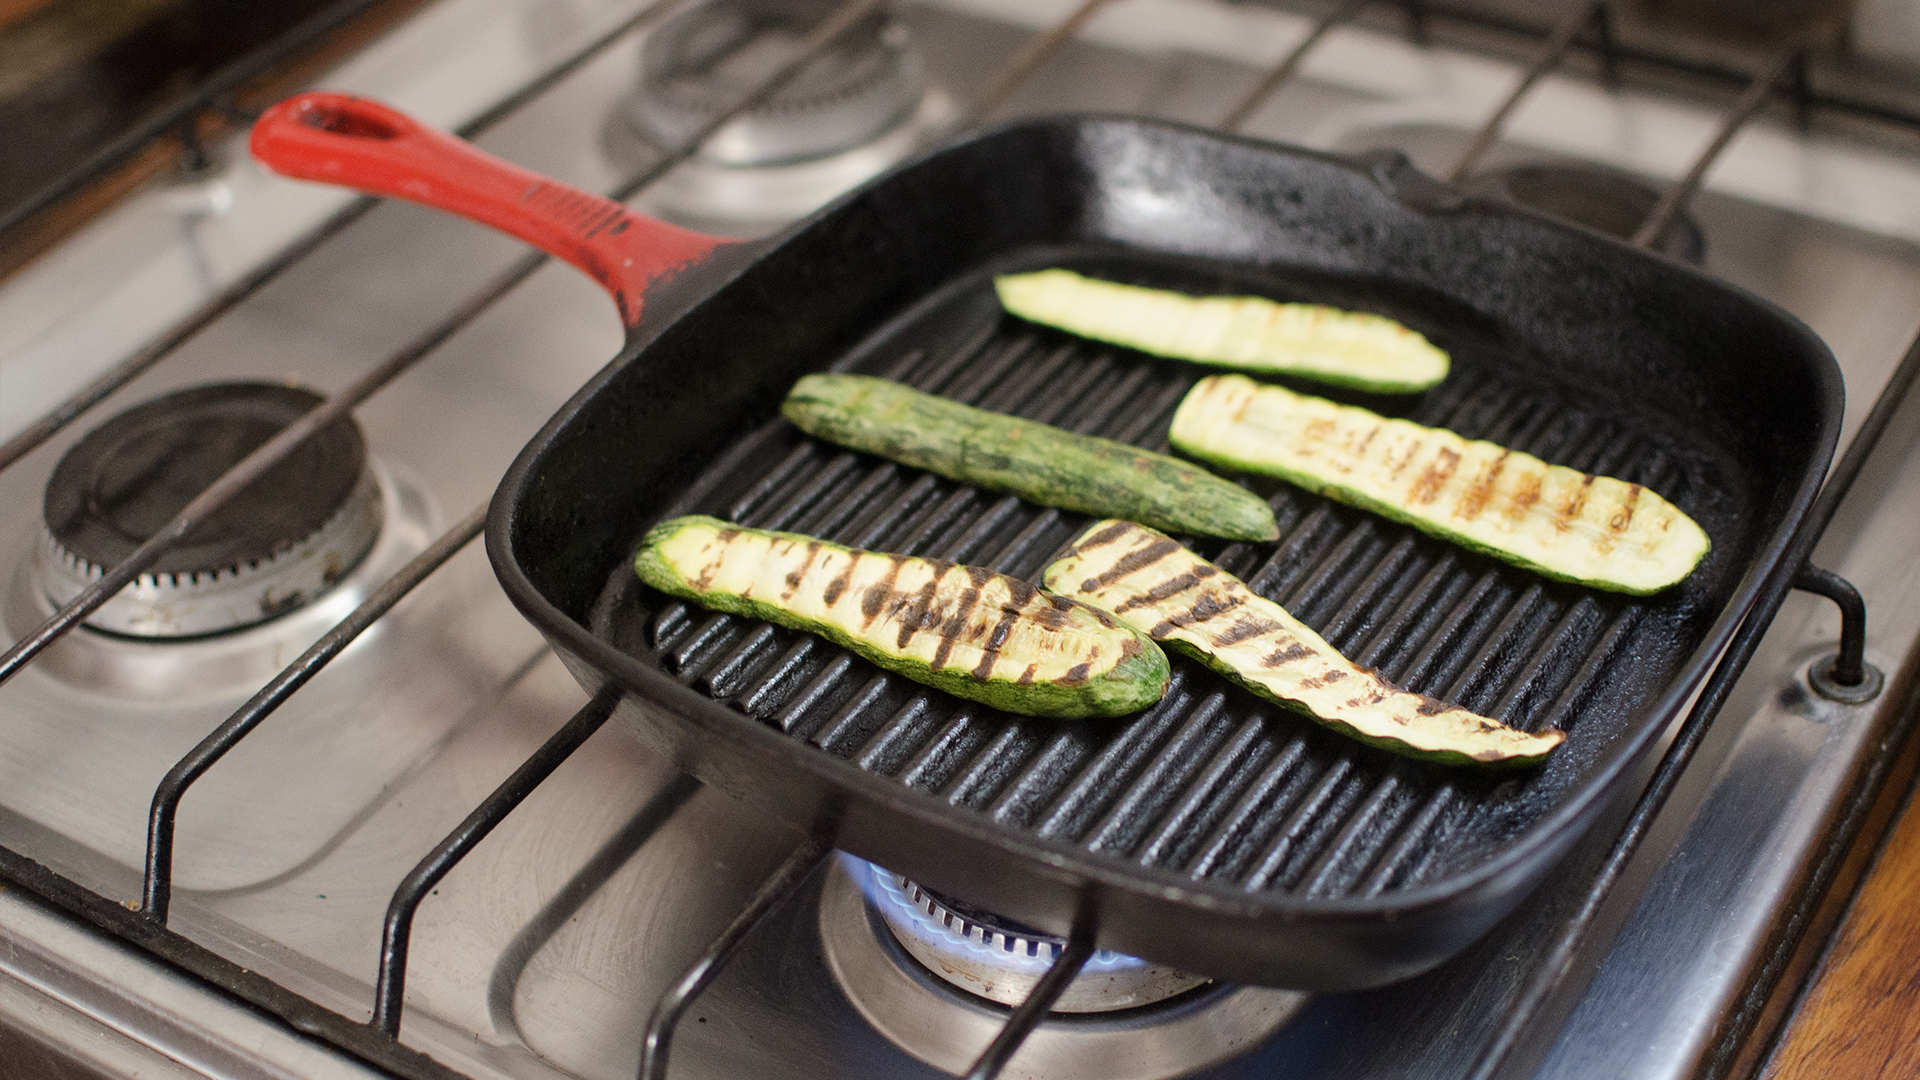 Image Titled Use A Grill Pan Step - Grill Pan Uses - HD Wallpaper 